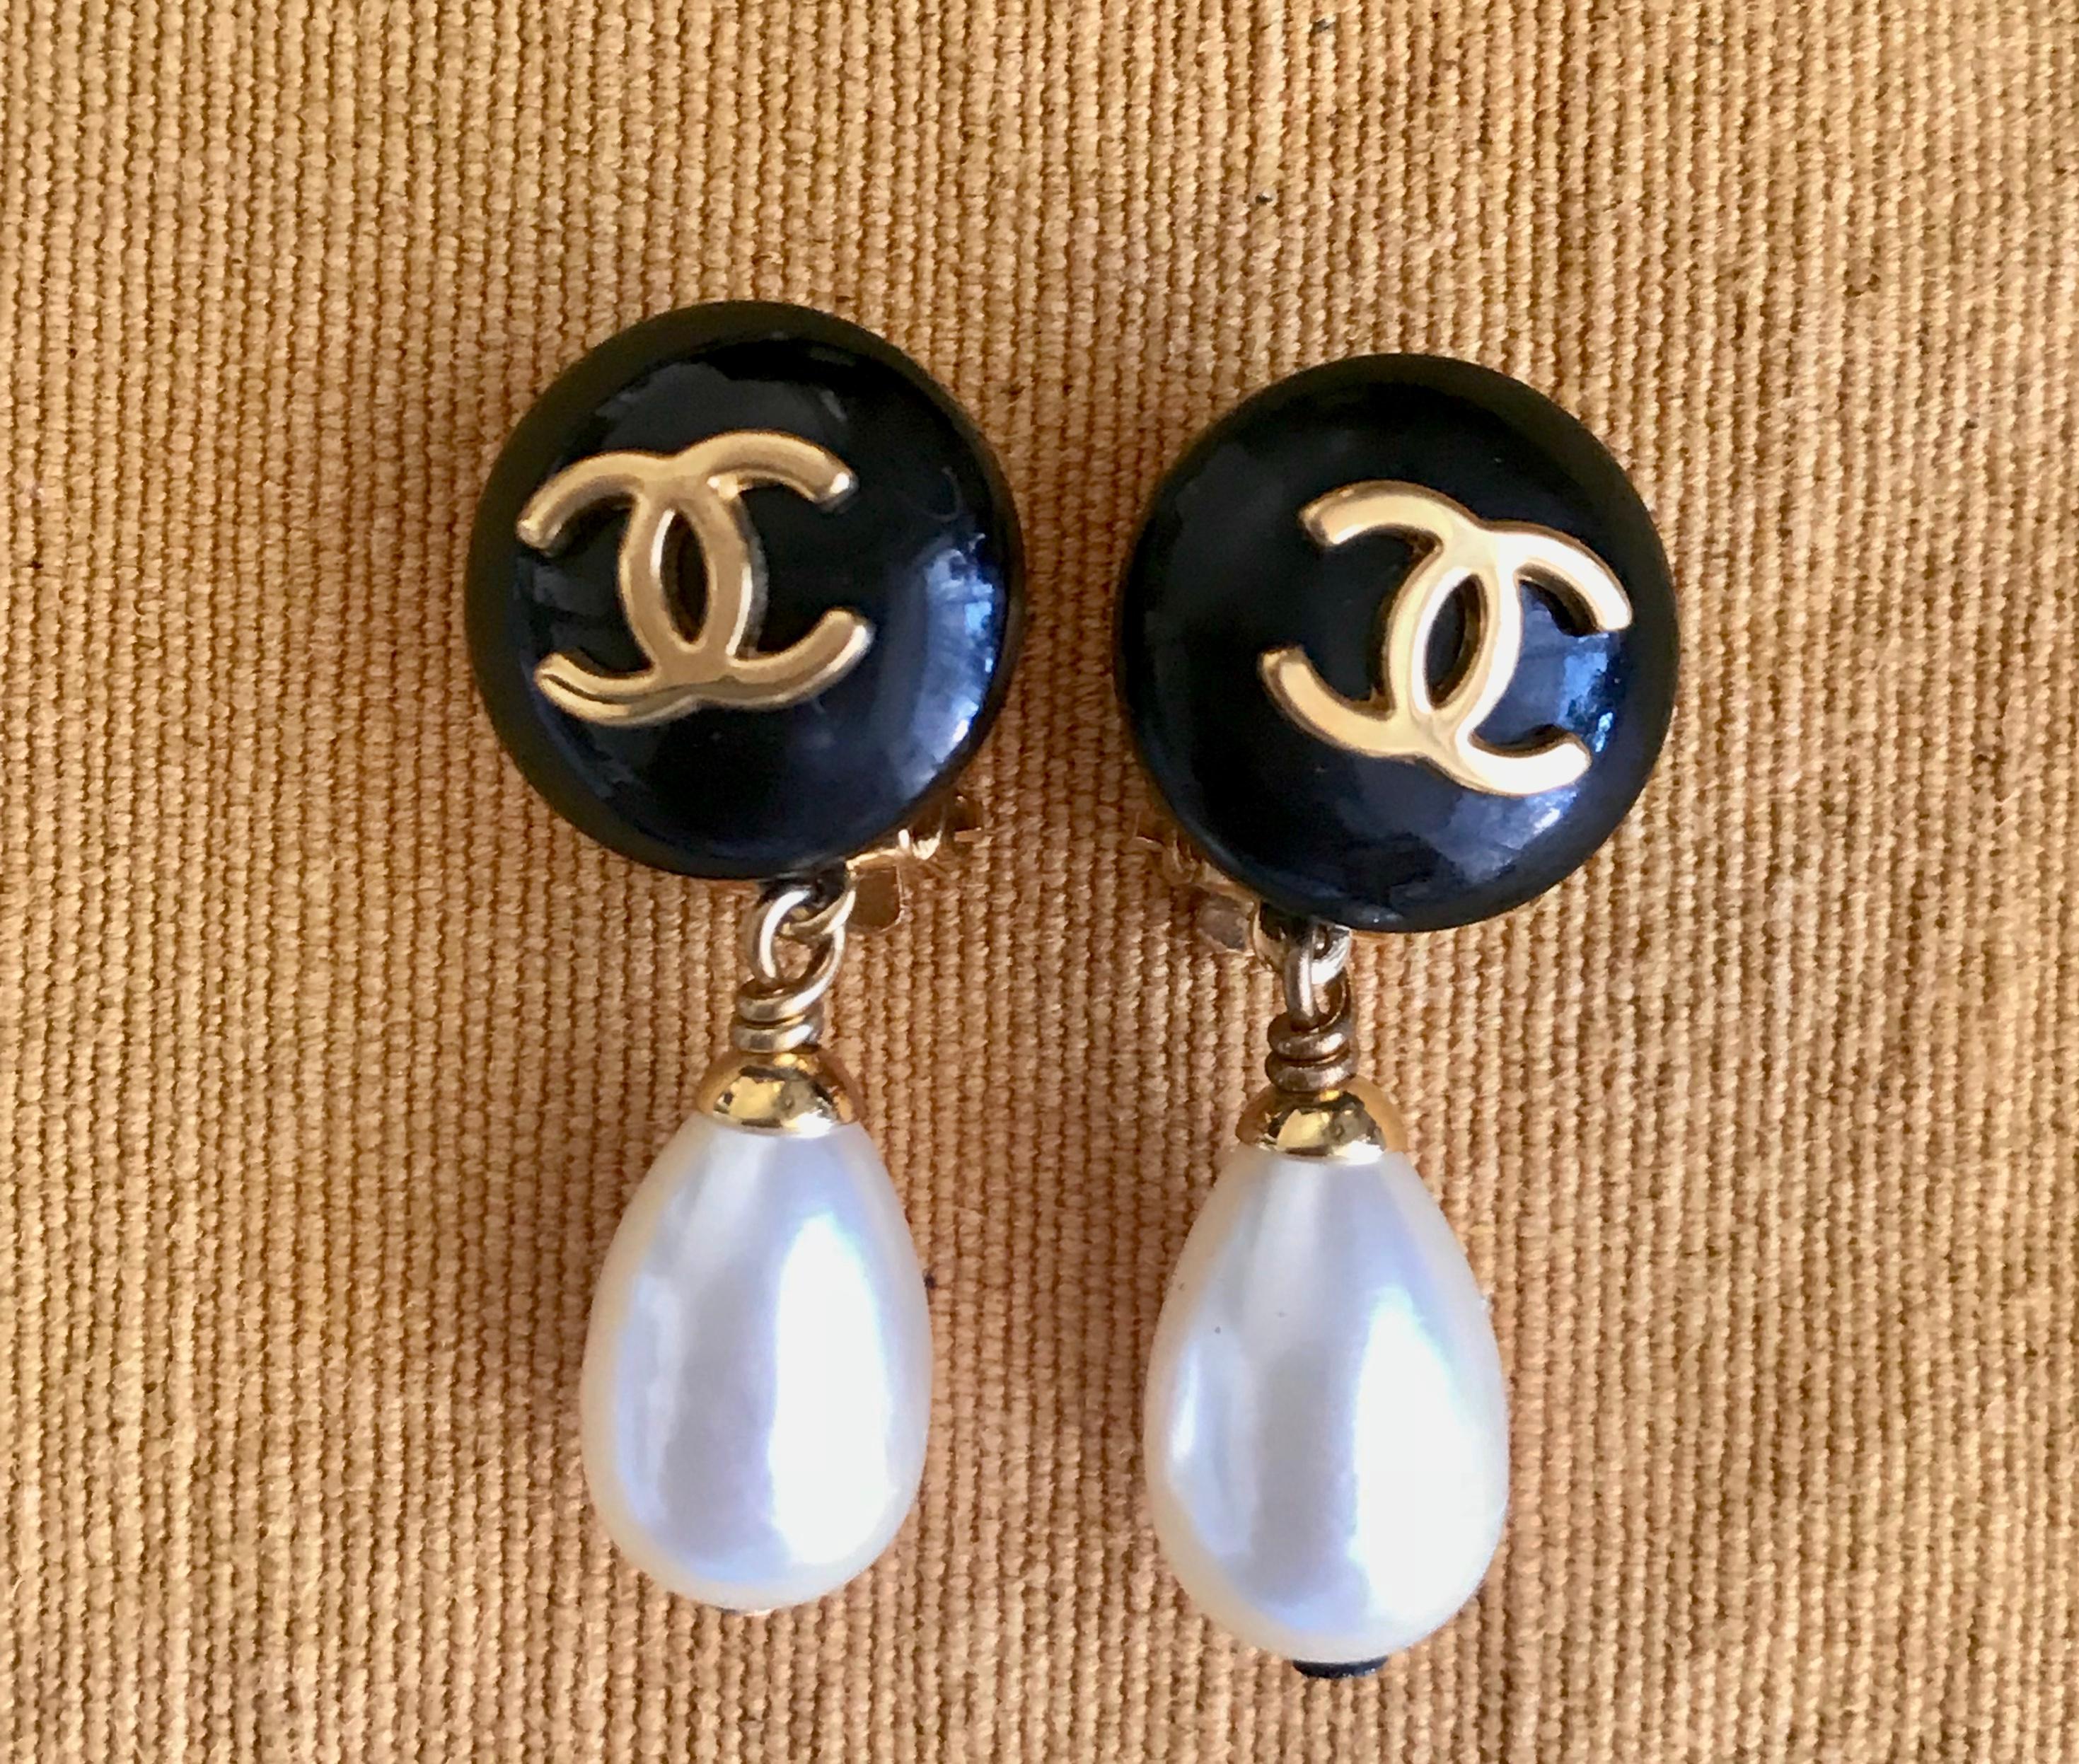 1990s. Vintage CHANEL teardrop white faux pearl earrings with black and golden CC mark on top. Chanel dangling earrings.
Beautiful vintage condition. Perfect gift!

 
Wearing these earrings will make you look absolutely stunning and hot!


Gently